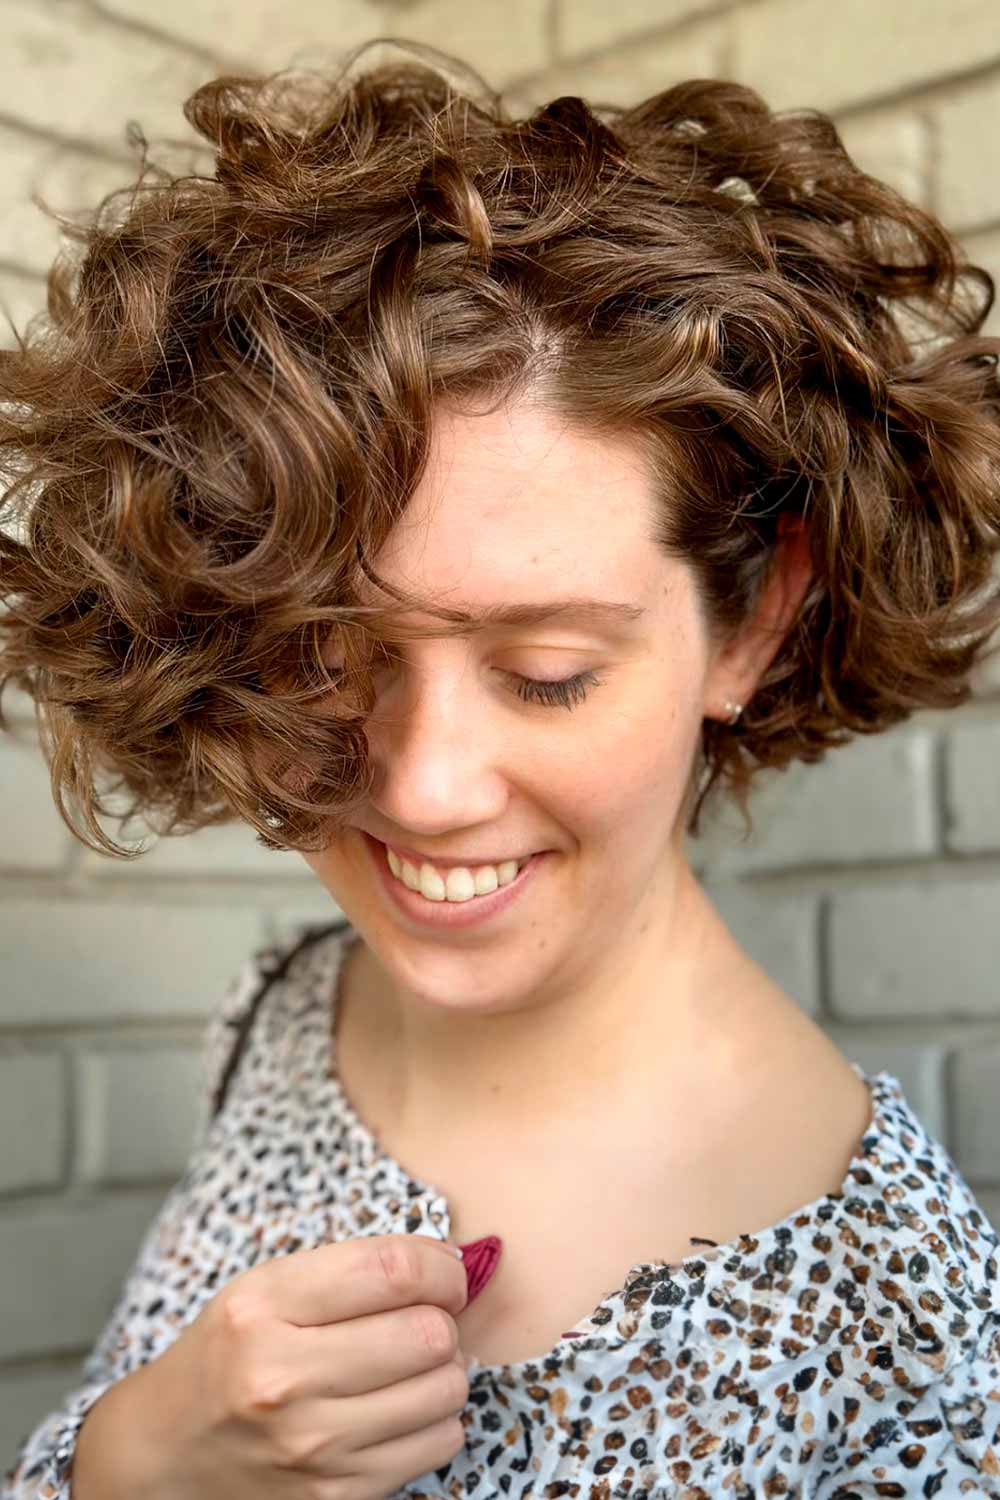 Messy Chin-Length Inverted Bob Hairstyle #curlybob #haircuts #bobhaircuts #curlyhairstyles